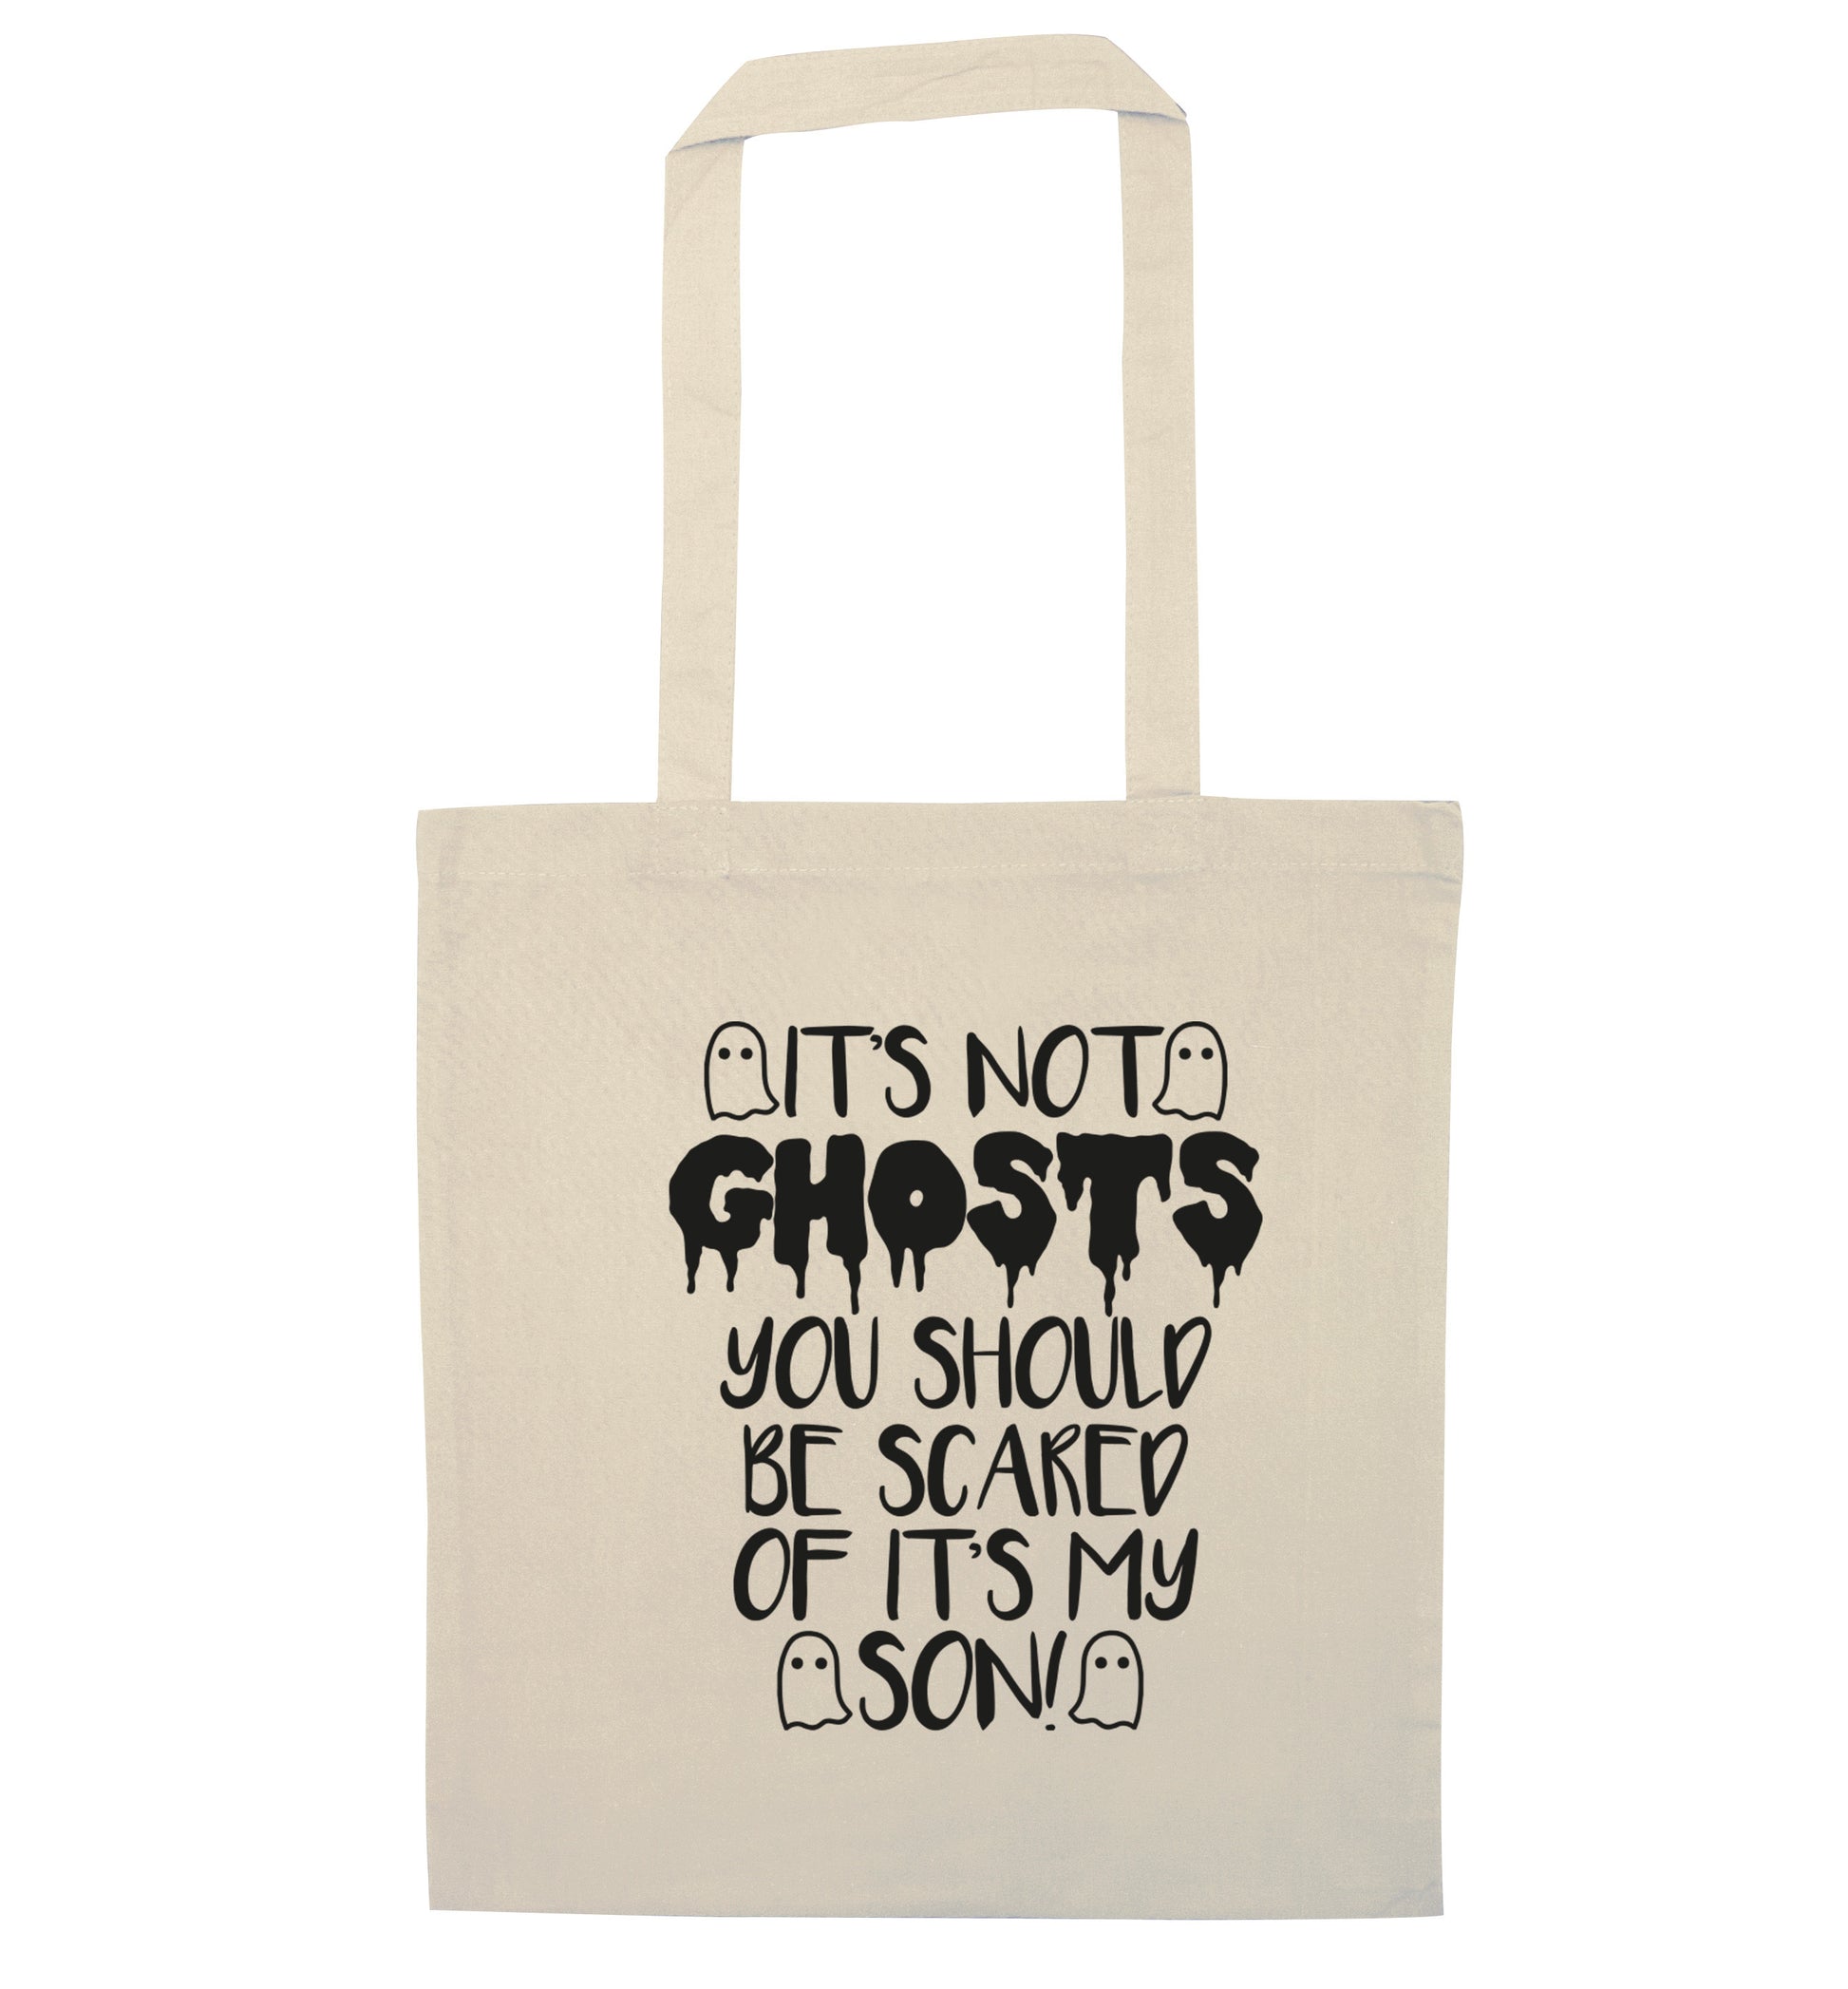 It's not ghosts you should be scared of it's my son! natural tote bag